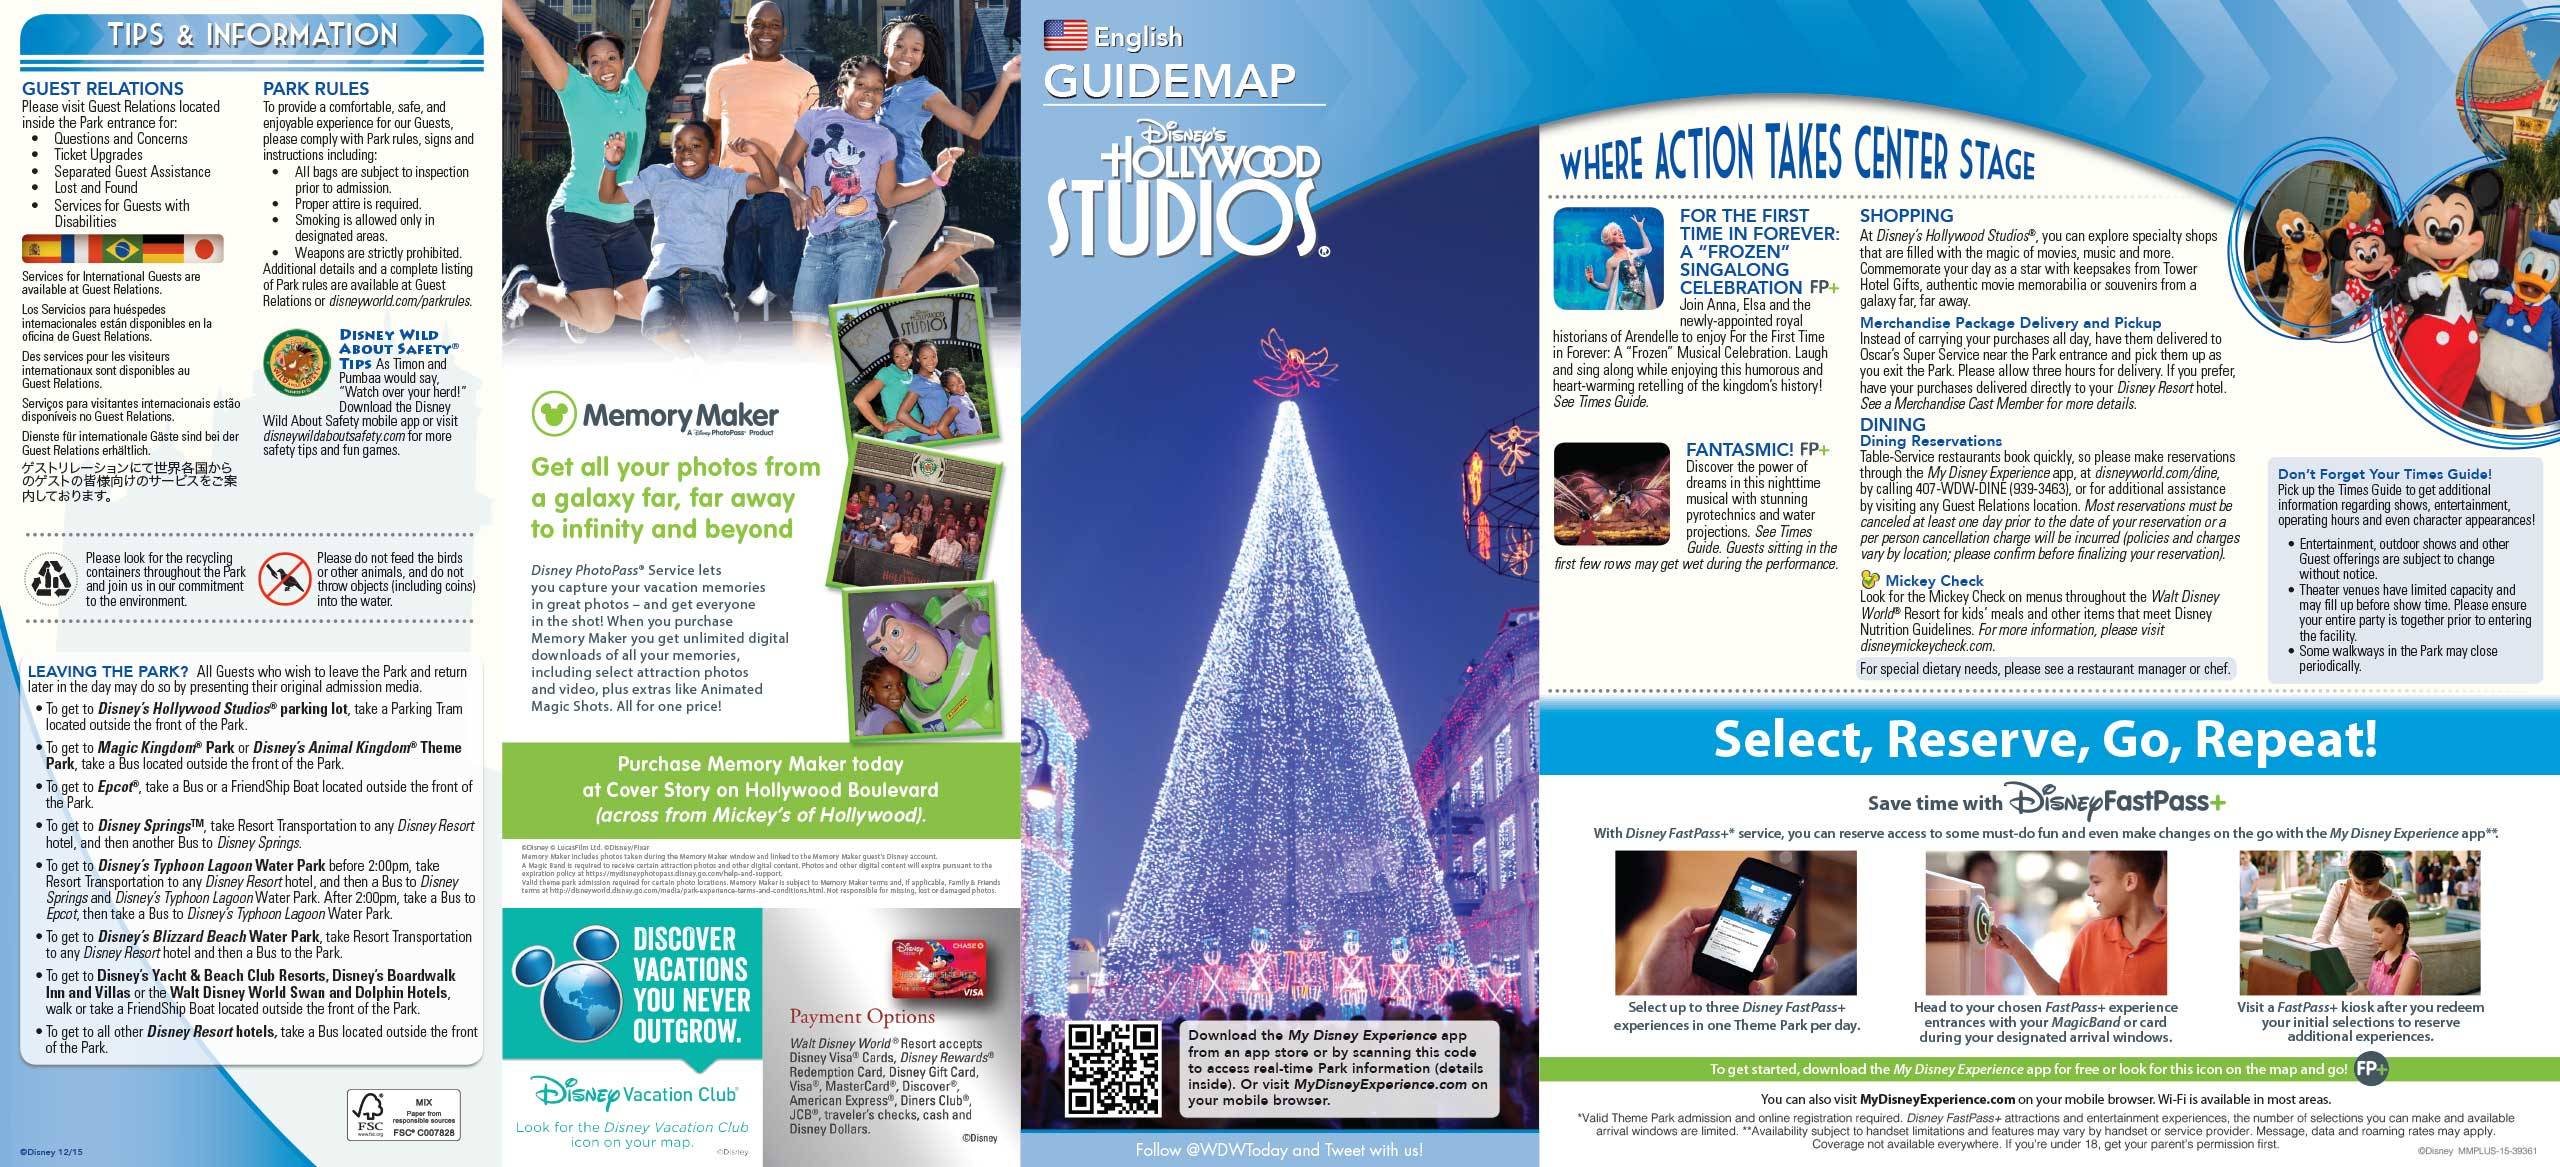 PHOTO - Disney's Hollywood Studios guide map updated to include Star Wars Launch Bay, Sunset Showcase and more